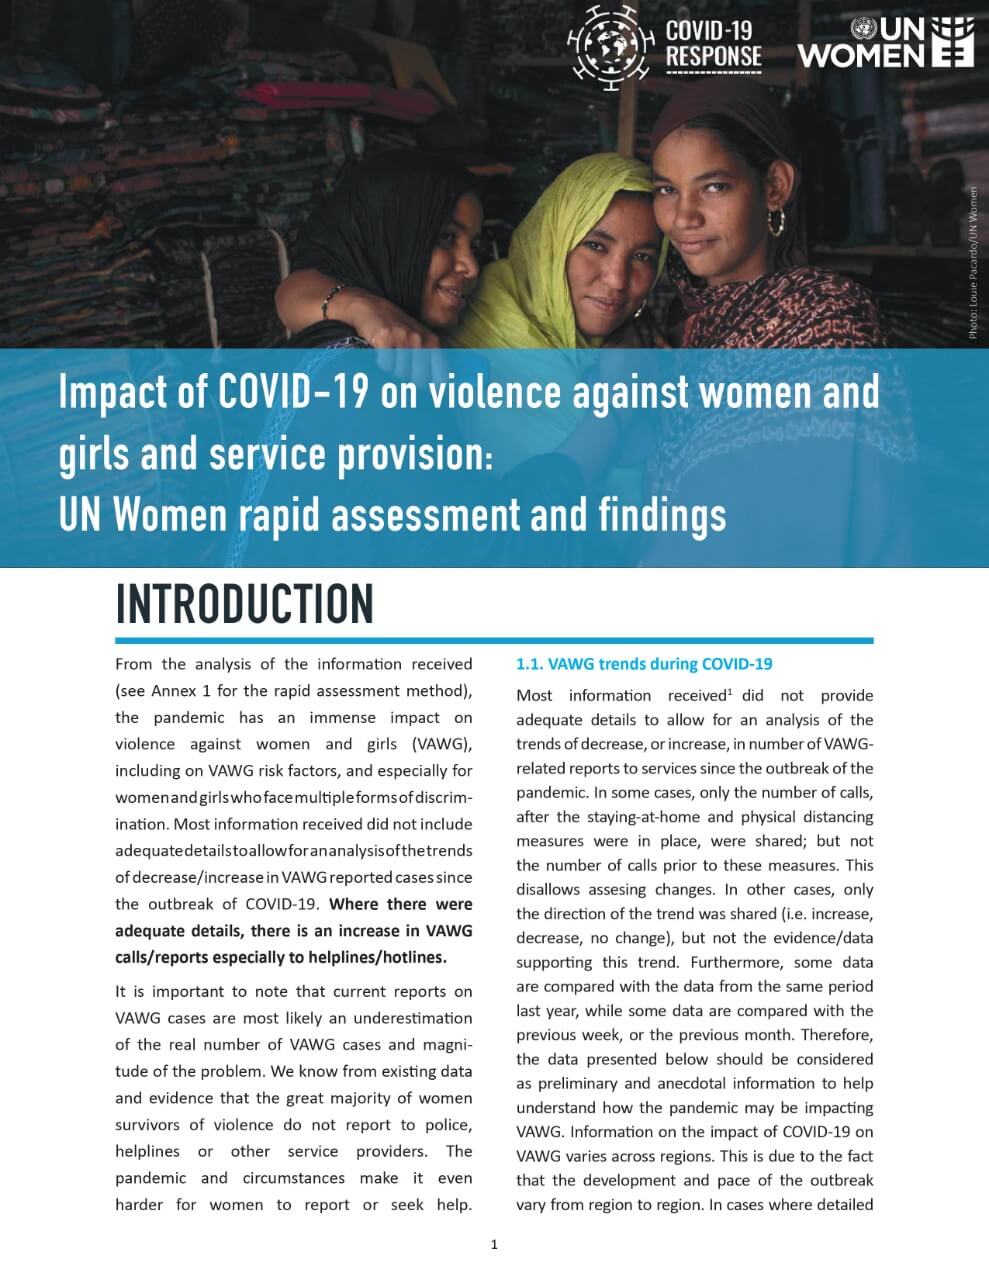 Impact of COVID-19 on violence against women and girls and service provision: UN Women rapid assessment and findings